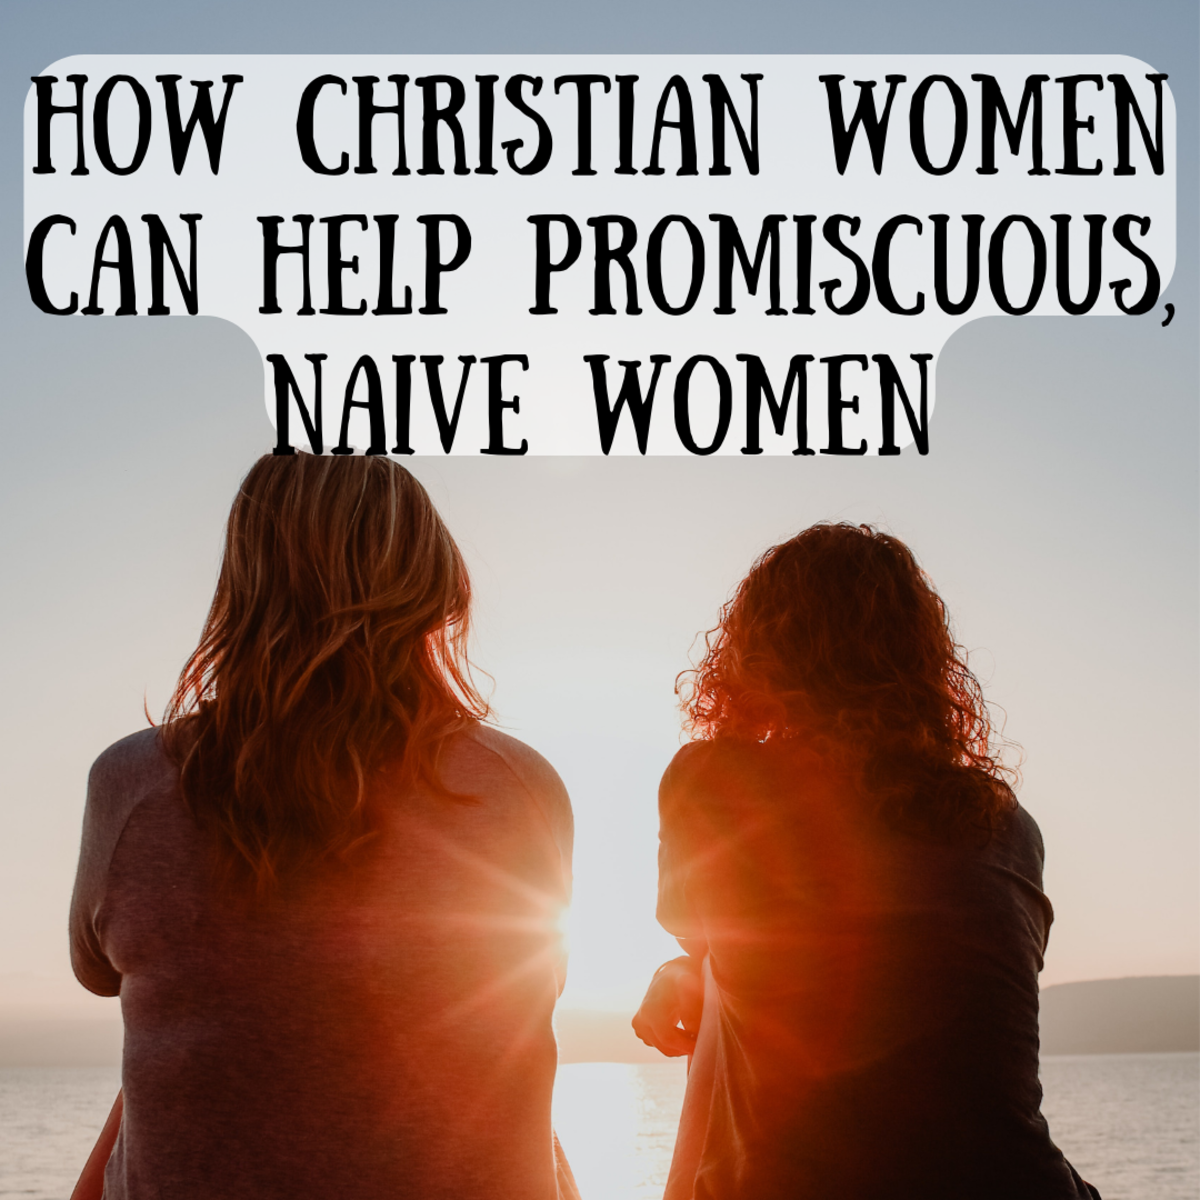 Read on to learn 4 important ways to empower and lift up promiscuous and naive women.